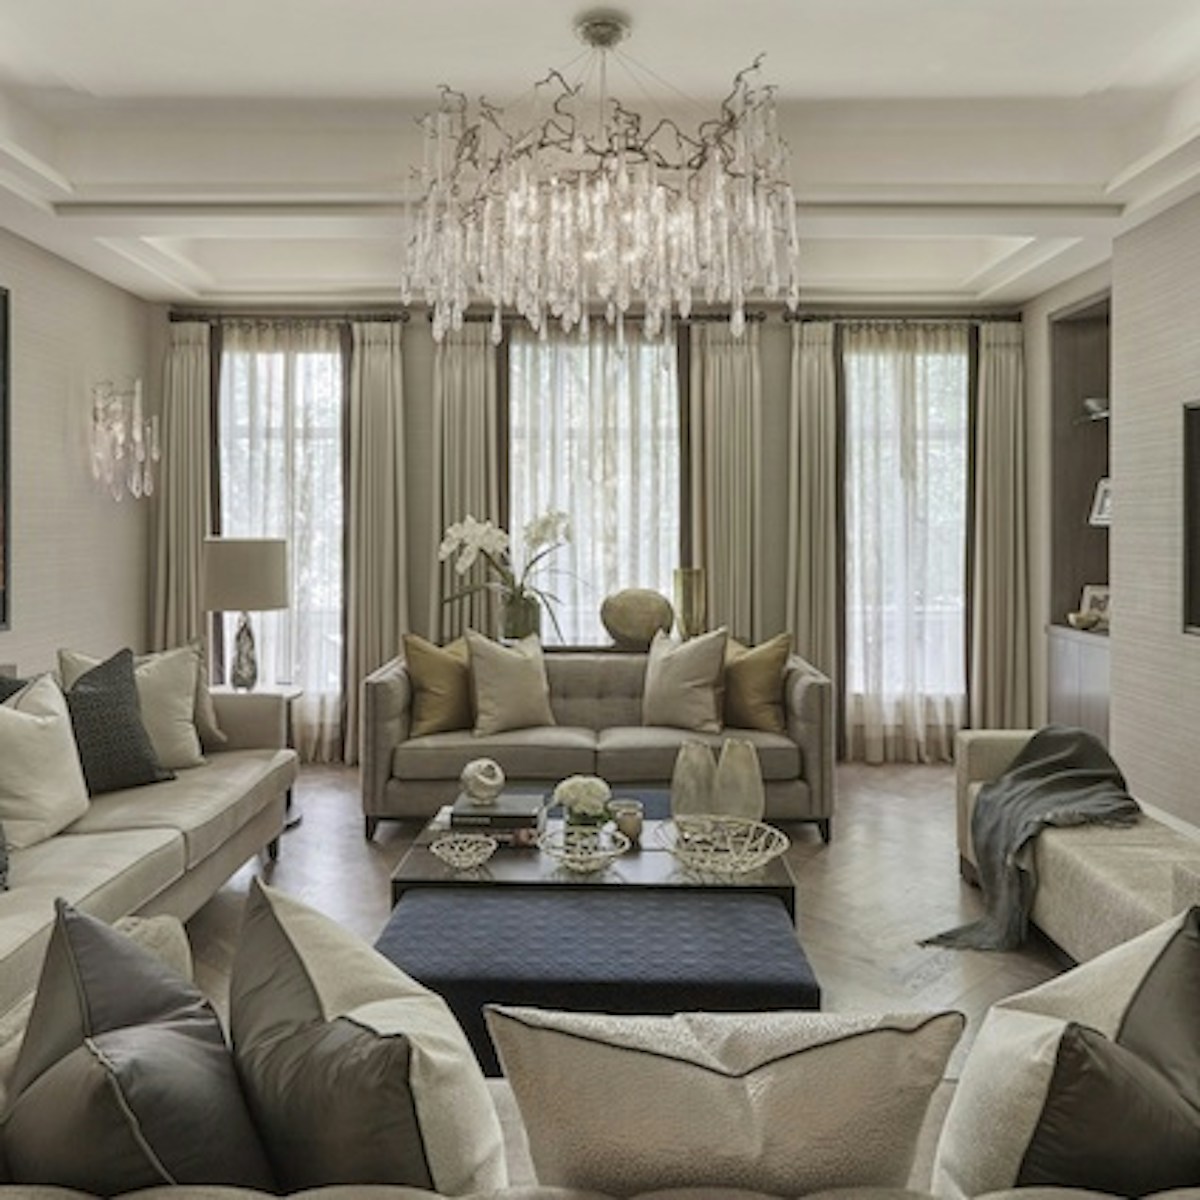 8 Rooms Transformed Using Statement Chandeliers | LuxDeco.com Style Guide